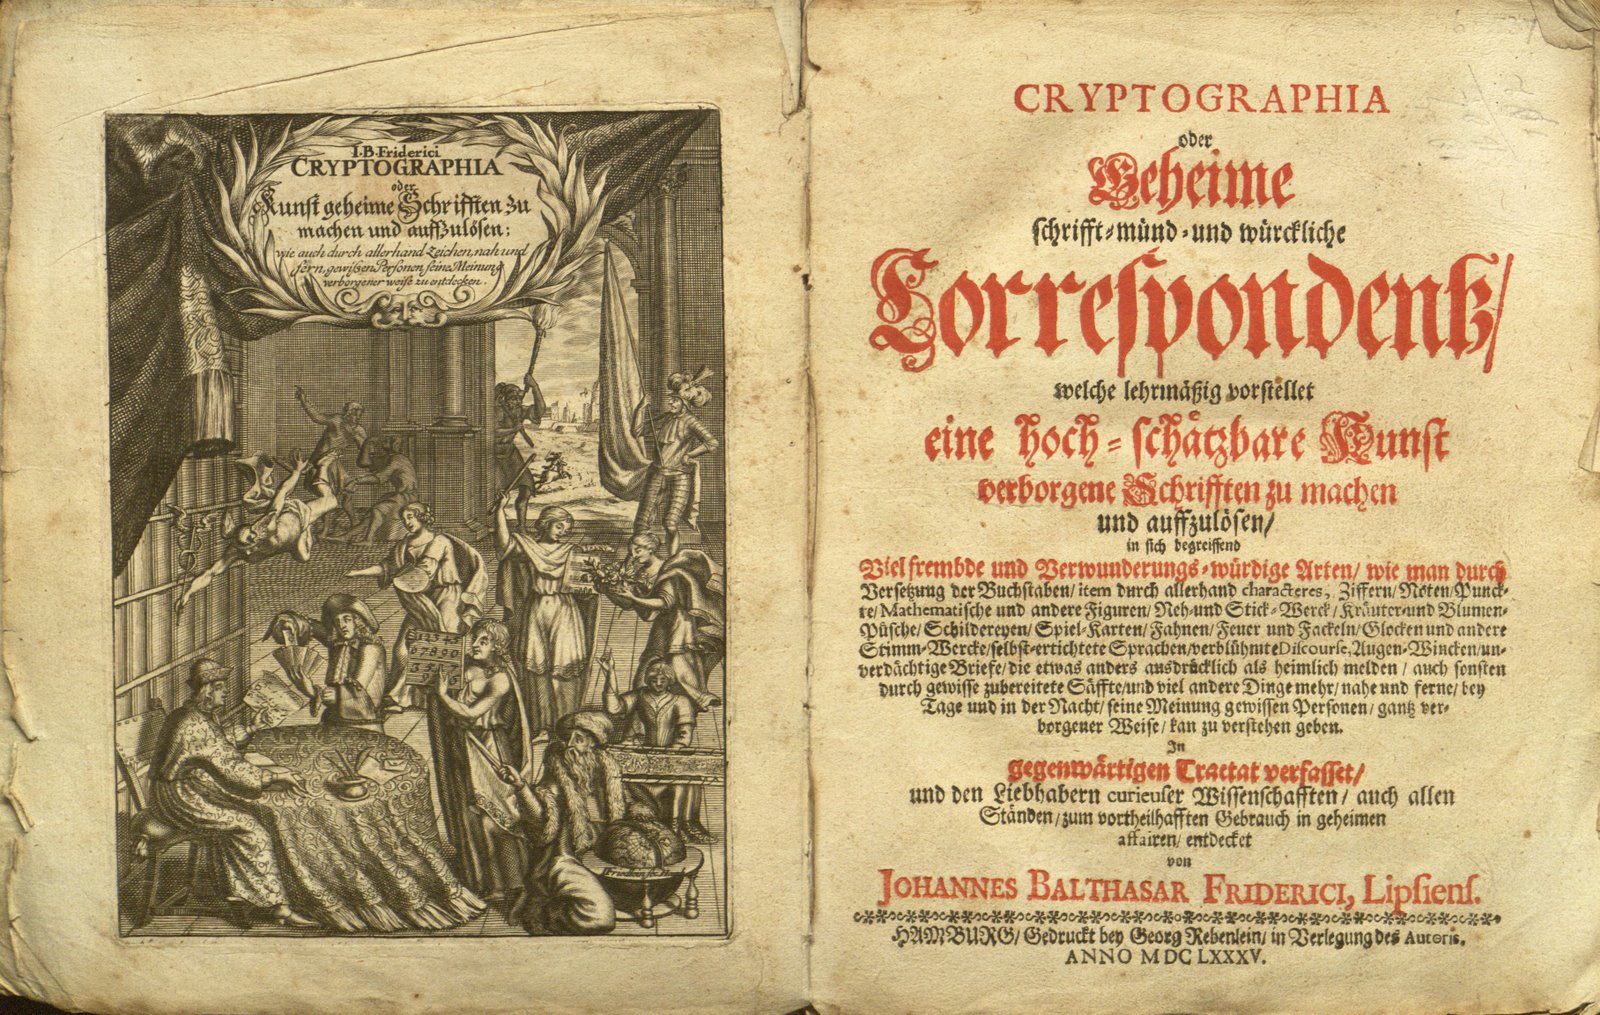 Opening pages of Cryptographia by Johannes Balthazar Friderici